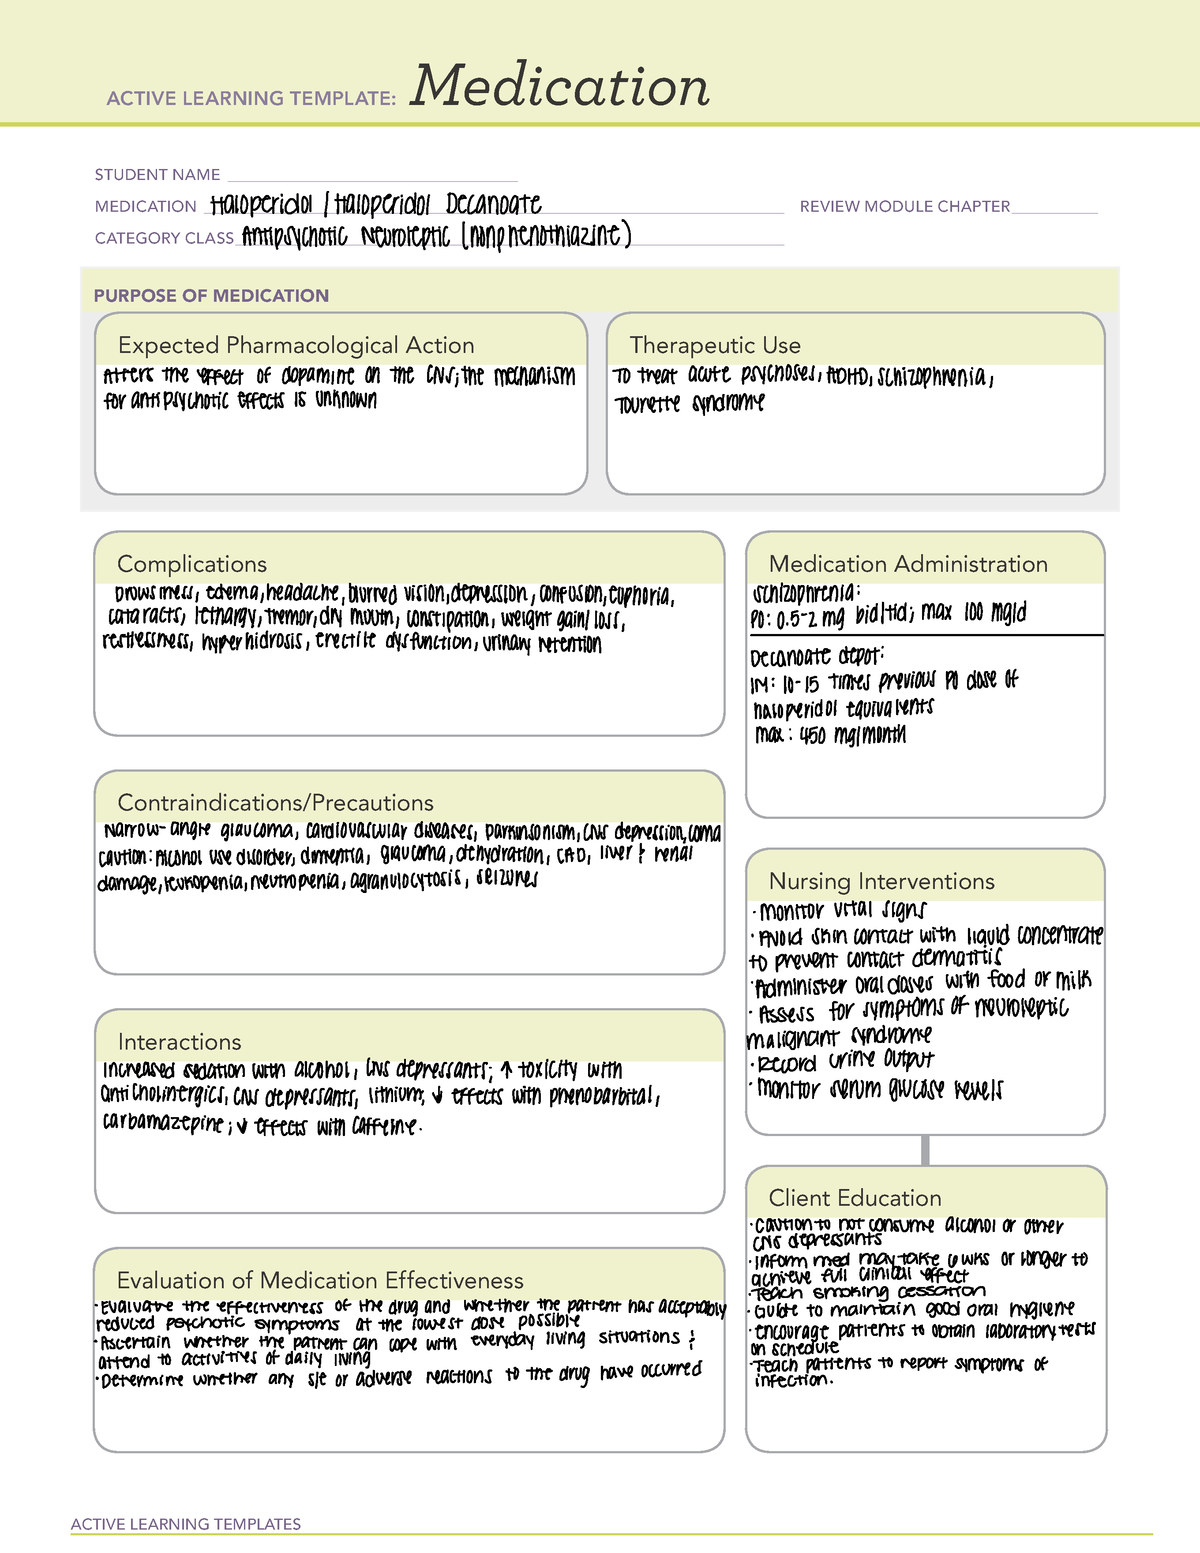 Active Learning Template Haloperidol ACTIVE LEARNING TEMPLATES